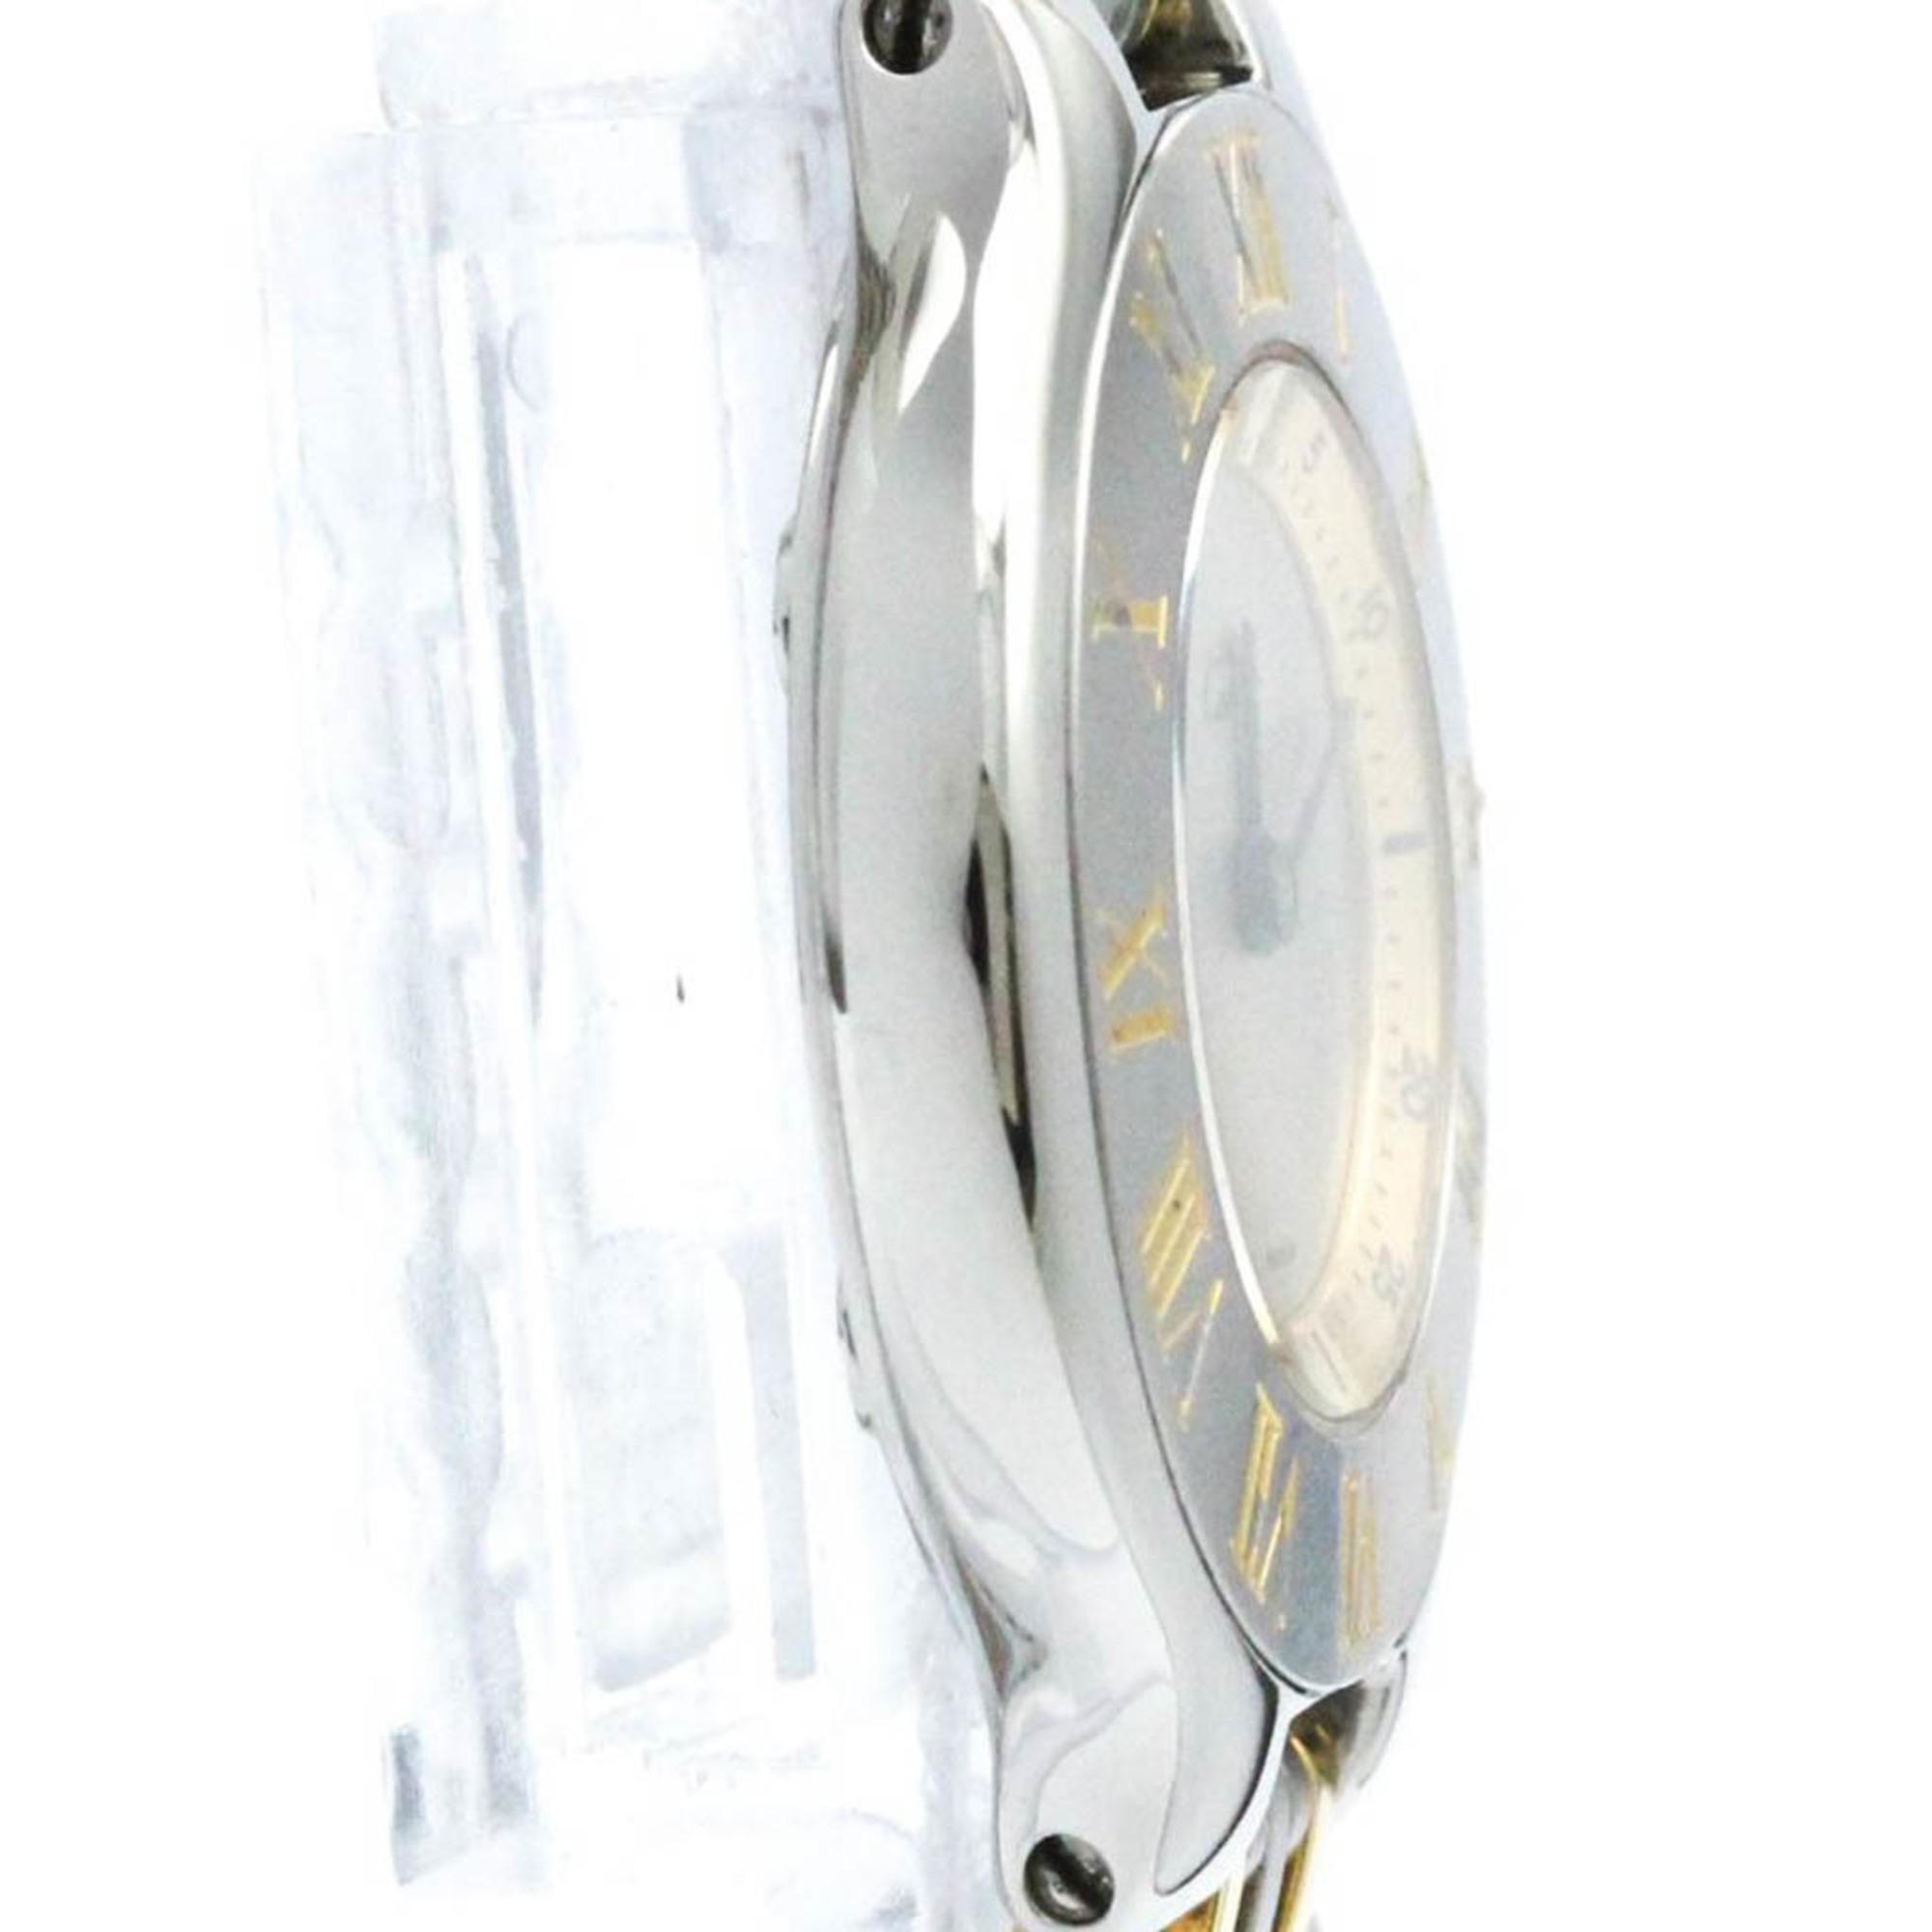 Polished CARTIER Must 21 Gold Plated Steel Quartz Ladies Watch BF569460